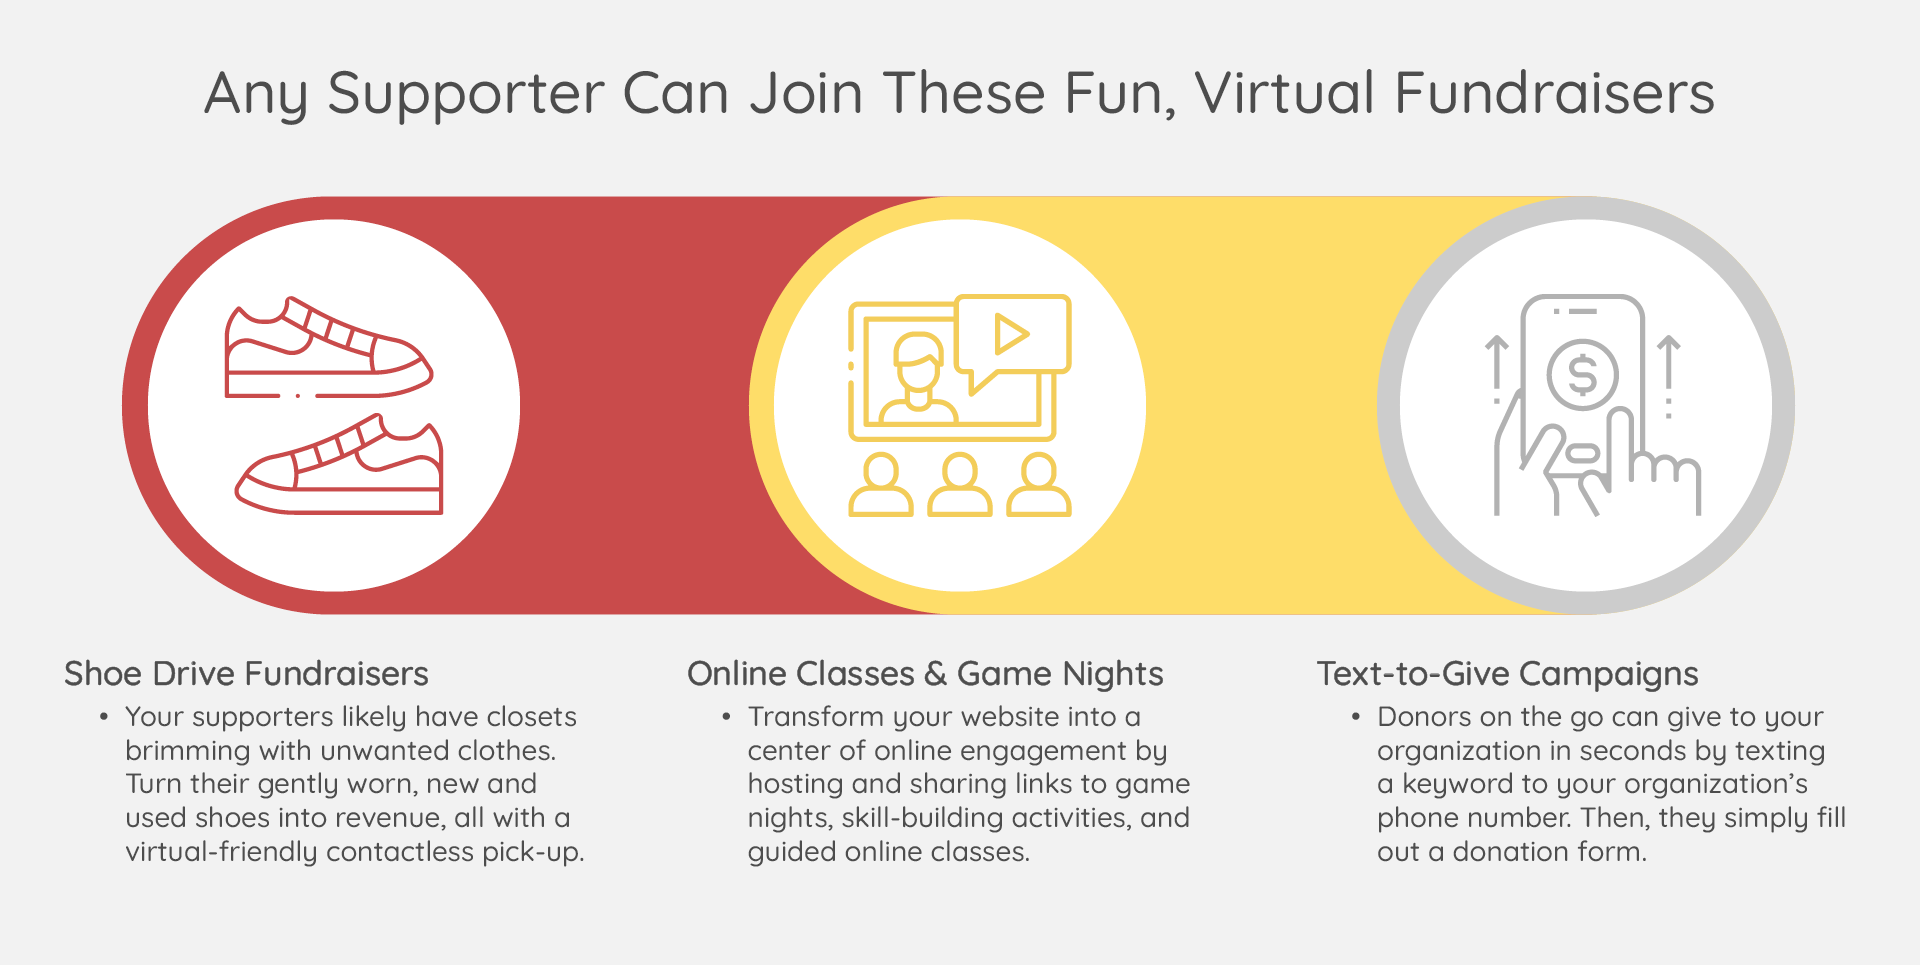 Follow these simple tips to maximize engagement and support for your virtual fundraisers!